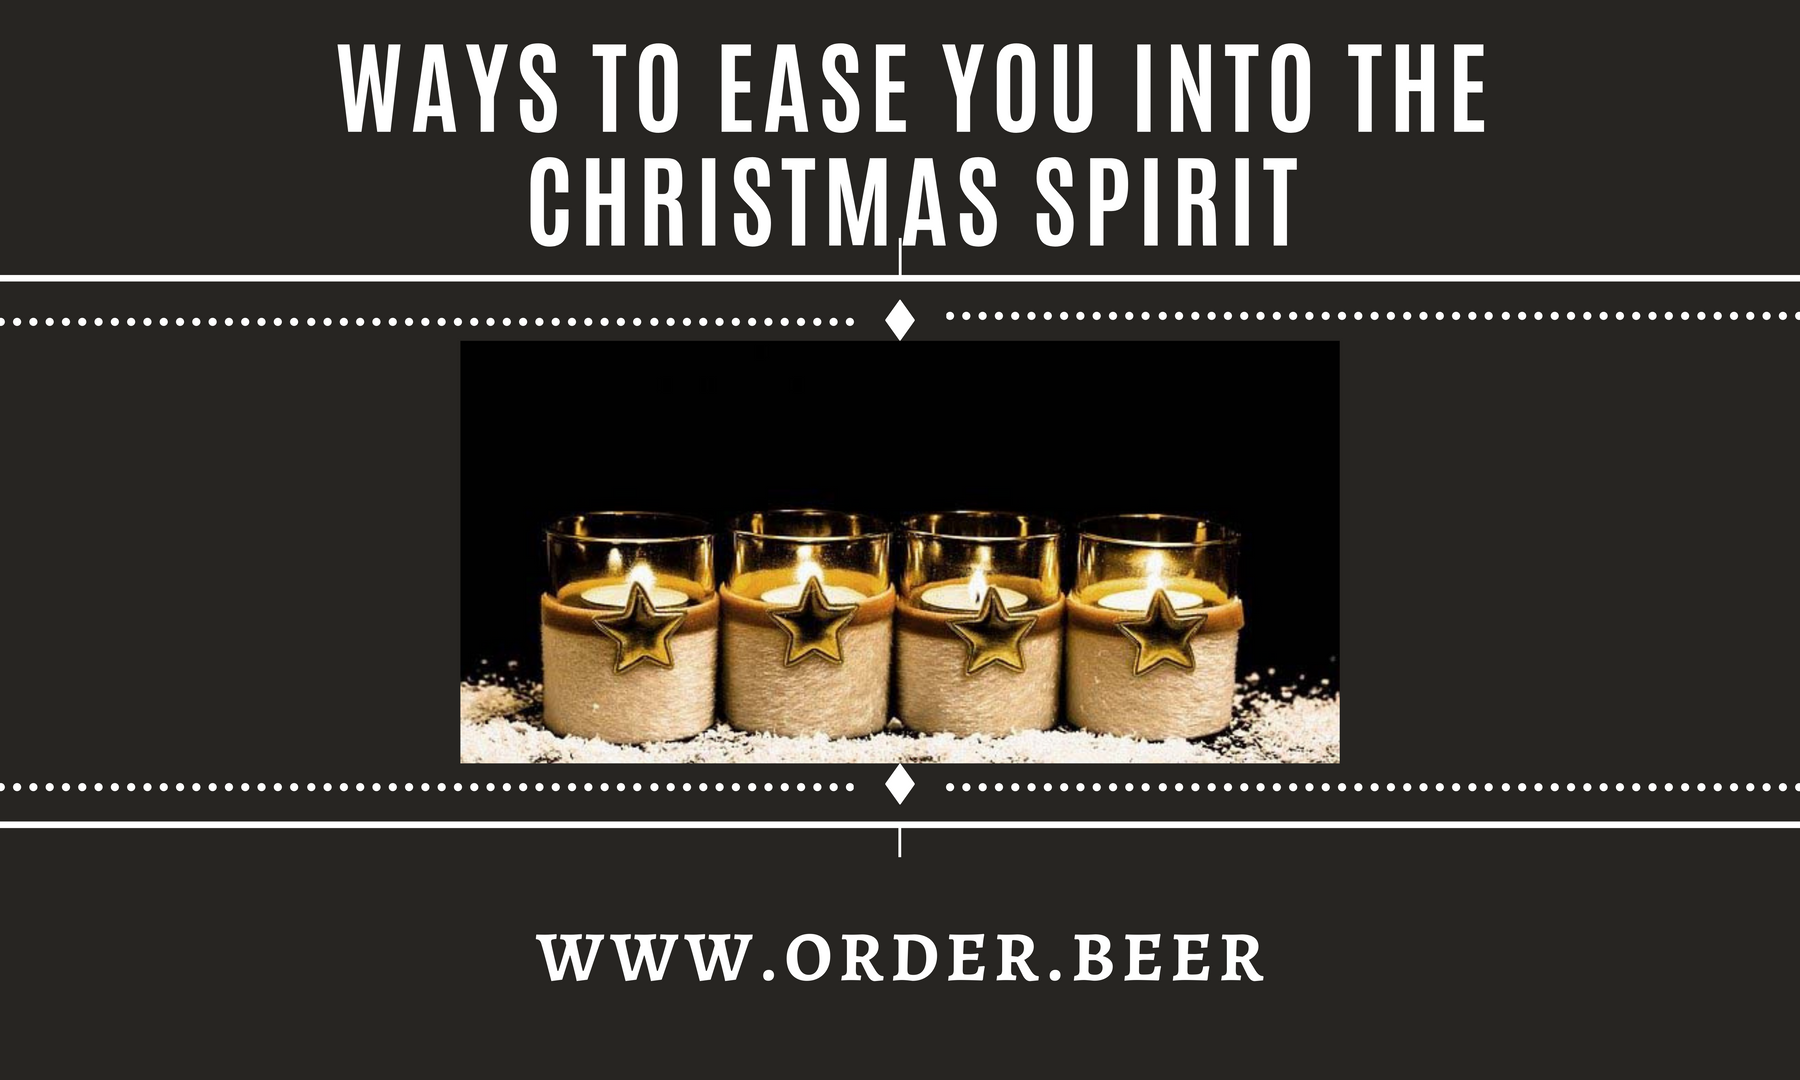 Ways to ease you into the Spirit of Christmas